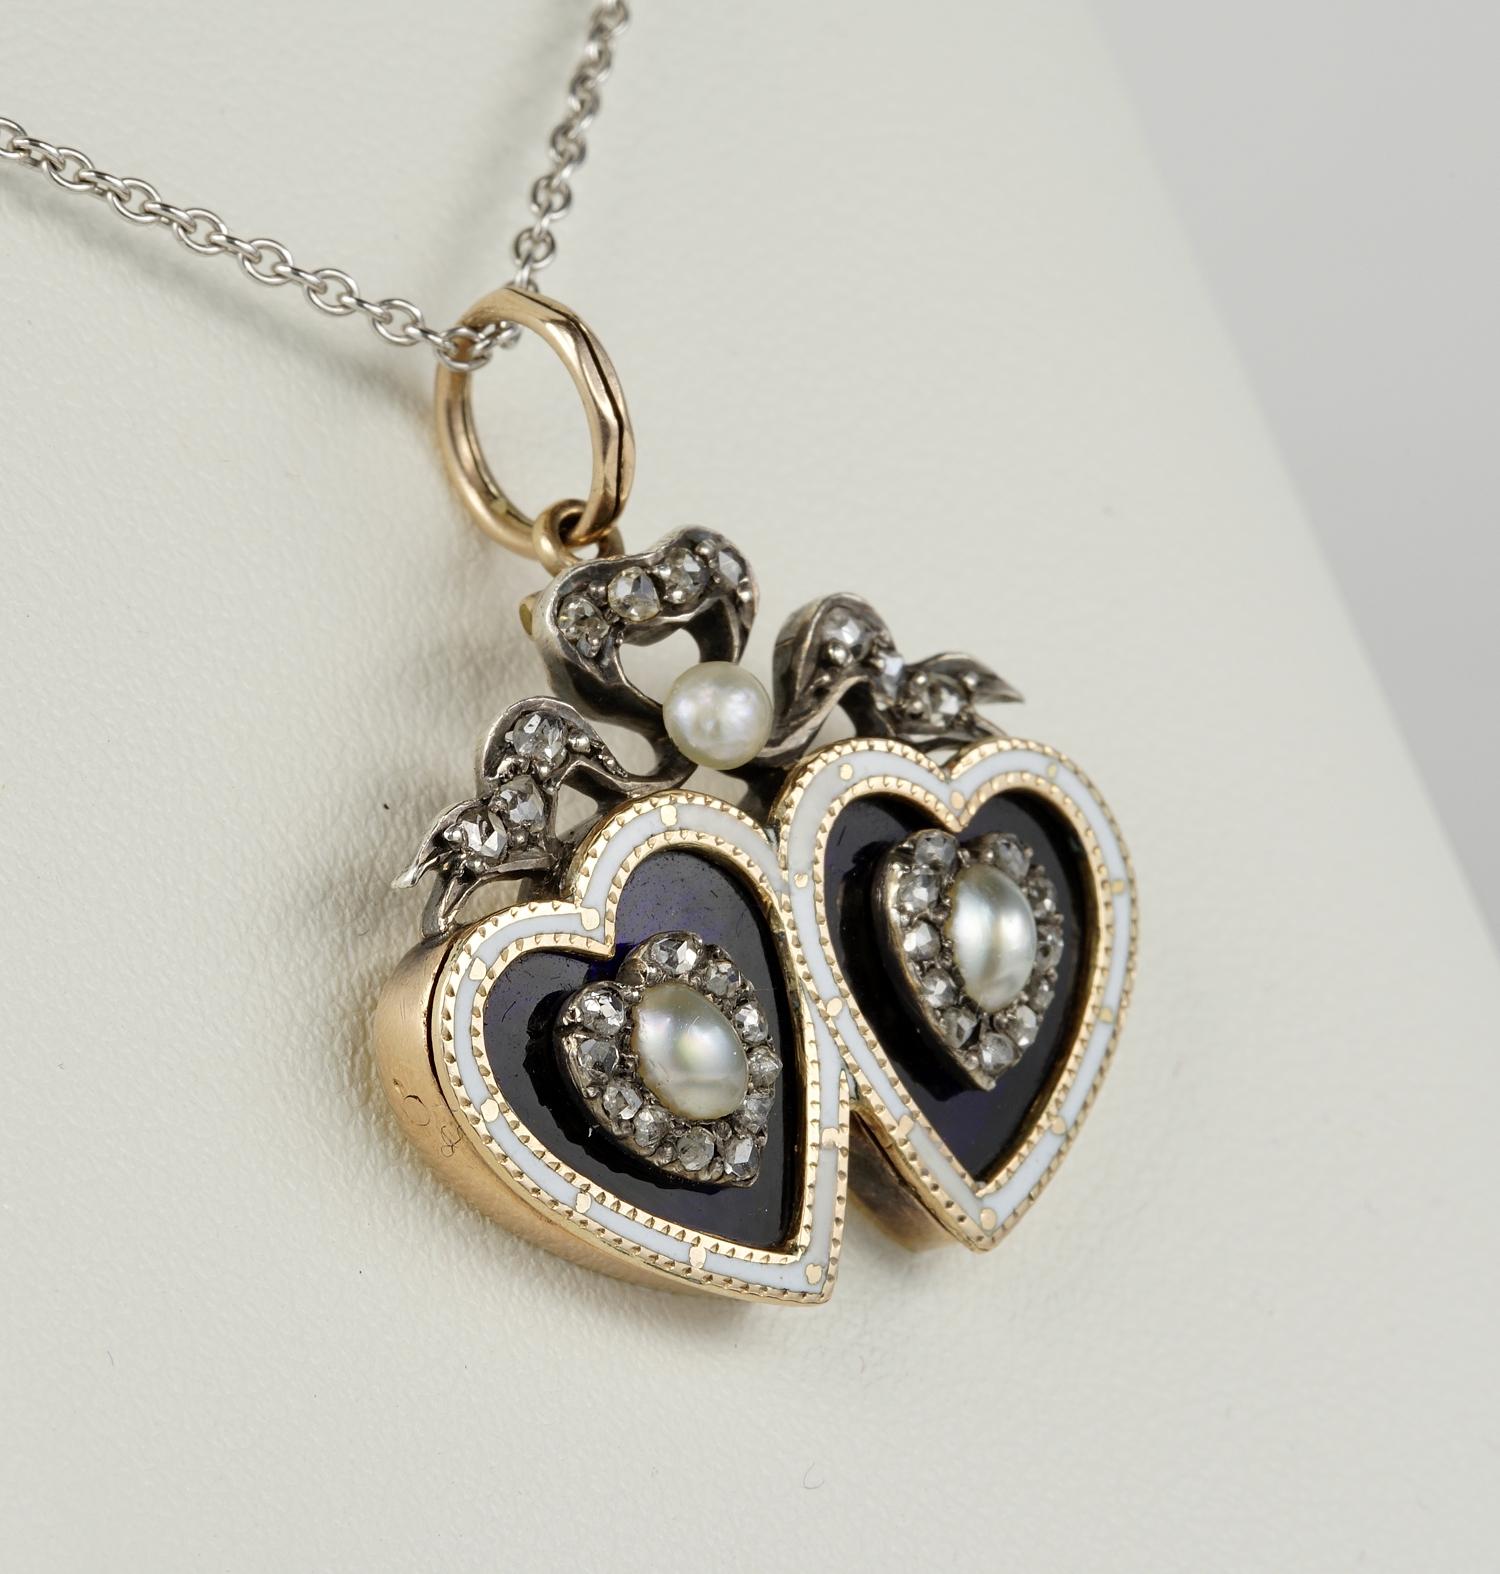 Romantic Georgian period tween heart pendant 18 kt /Silver set
Modelled as two hearts entwined by a gorgeous Diamond bow as symbol of enduring love, pearl is seal of purity
Adorned by Royal Blue and White enamelling and natural not nucleated Pearls